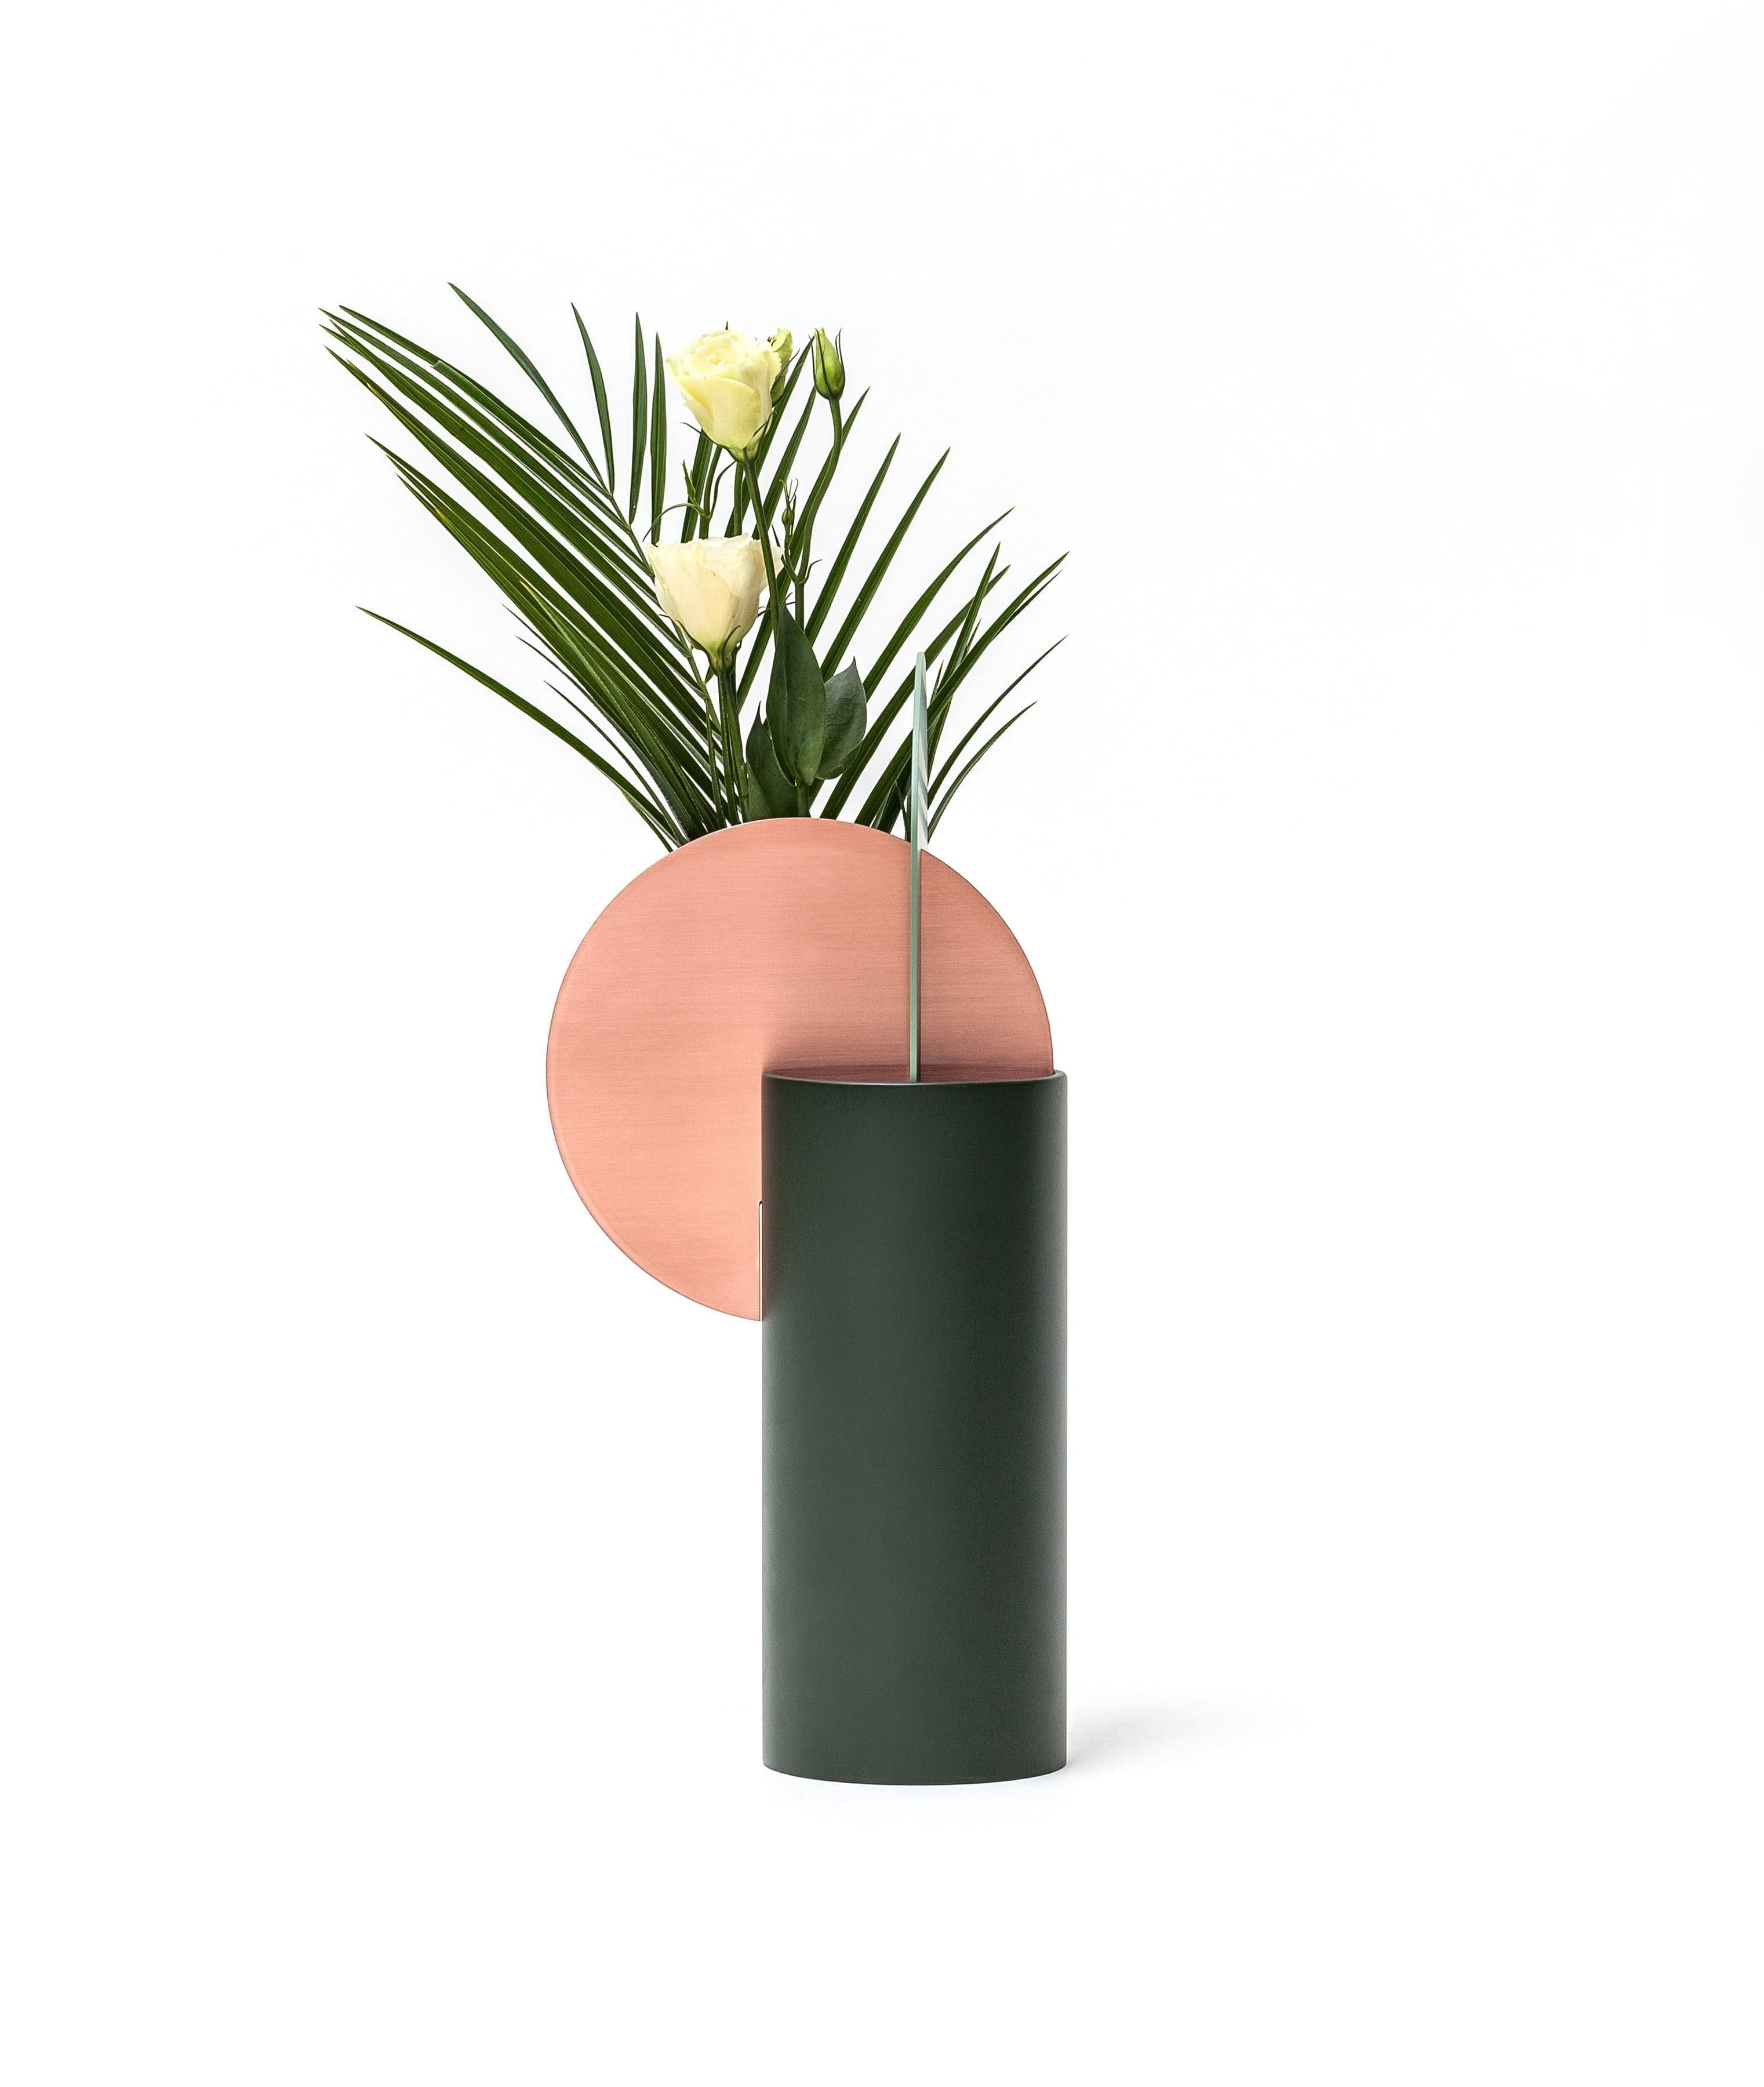 Brand: NOOM
Designer: Kateryna Sokolova
Materials: Copper, painted steel
Color Scheme: CS1 - pine green, sage green and copper
Dimensions: H 37 cm x W 17,5 cm x D 15 cm
Net Weight: 2,4 kg

Yermilov vase, one of the vases from the 